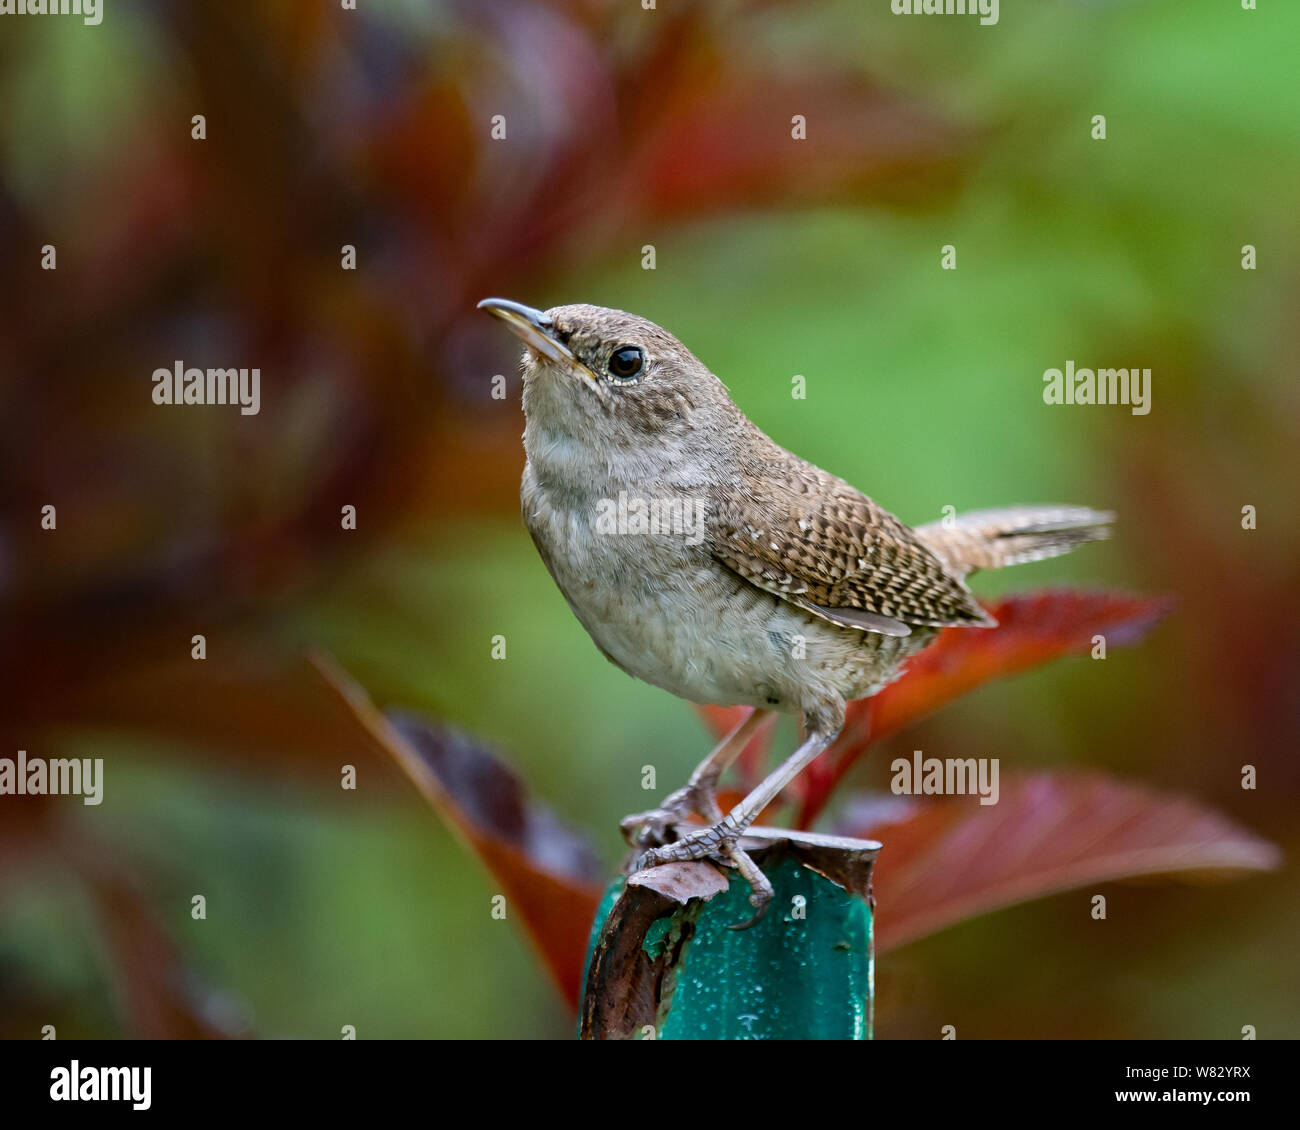 A house wren, Troglodytes aedon, sitting on a fence post in the garden in Speculator, NY USA Stock Photo